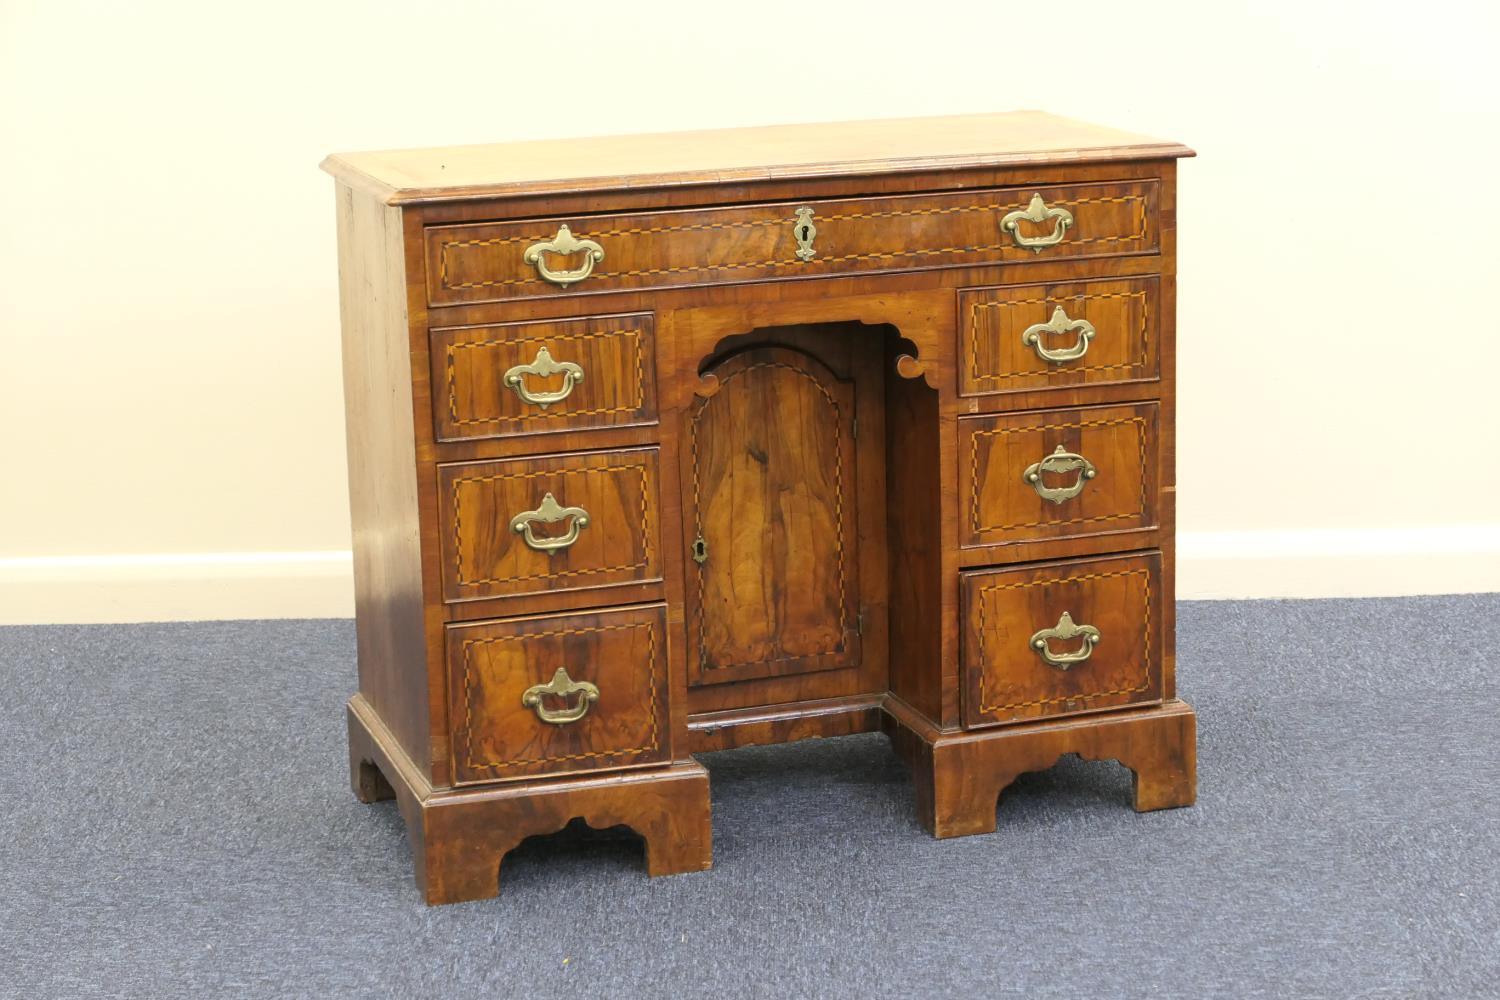 Walnut inlaid kneehole desk, 18th Century, quarter veneered top crossbanded and with ebony and